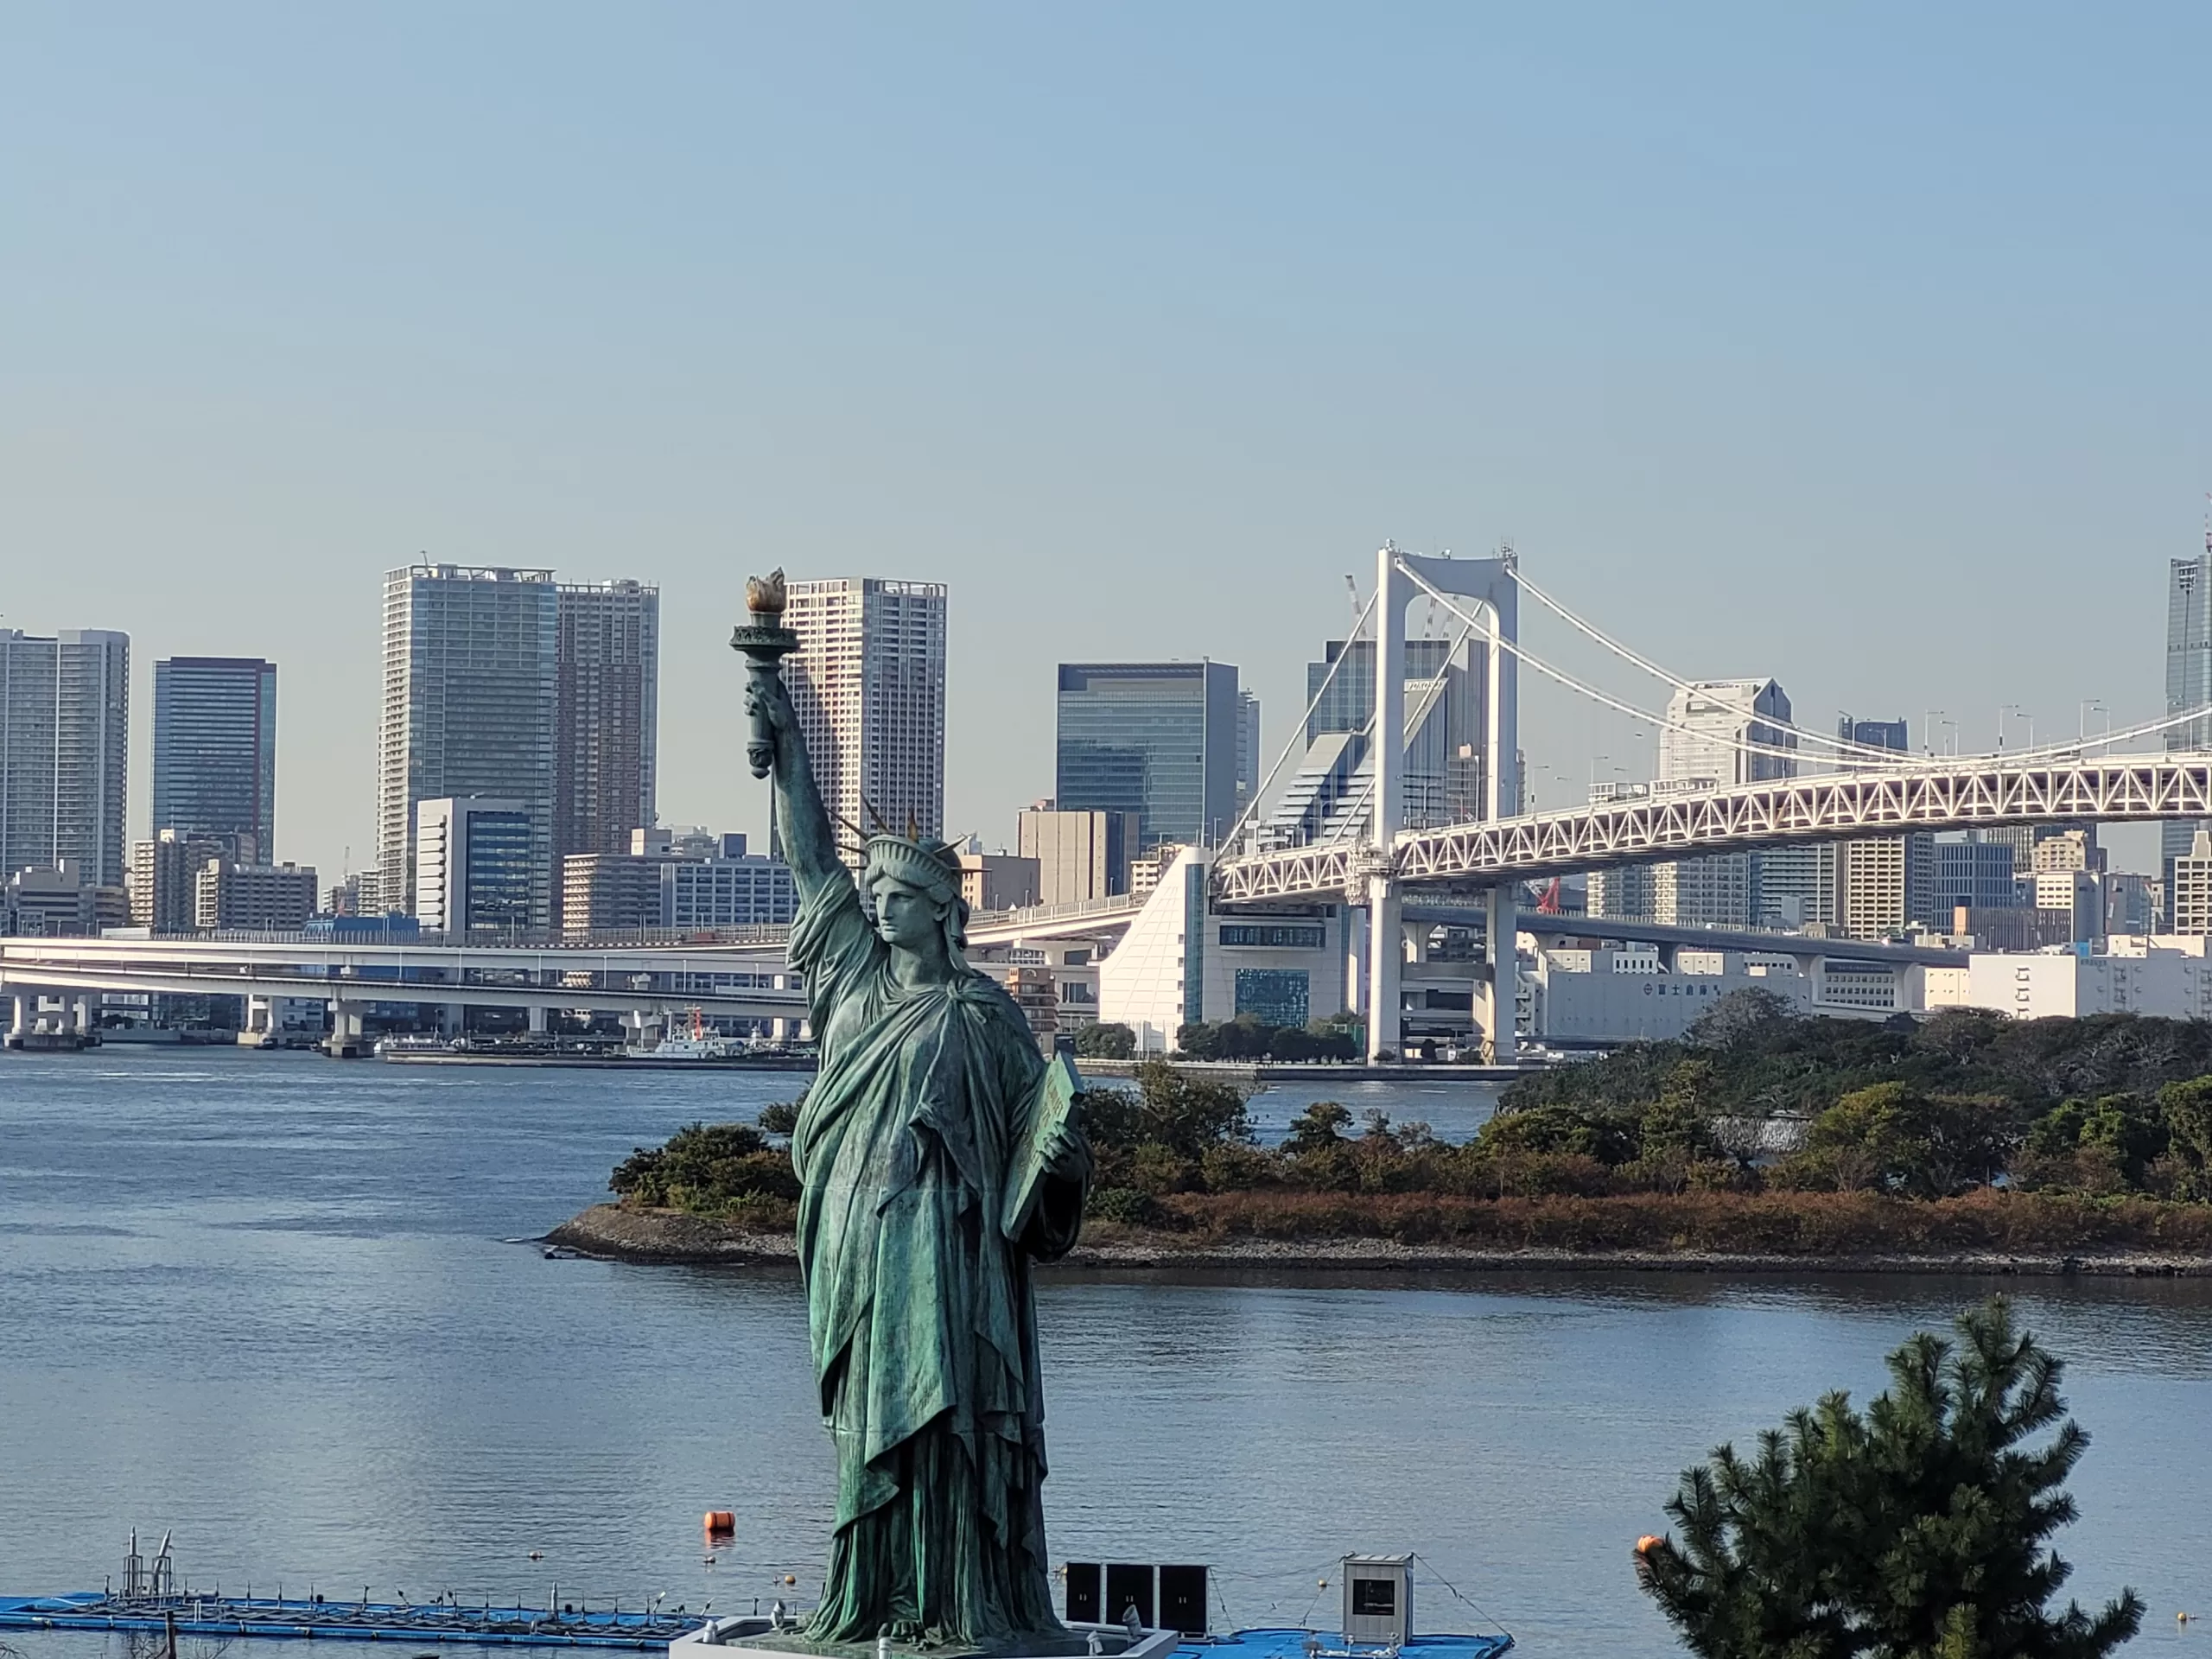 A day in Odaiba – 5 cool things to see!